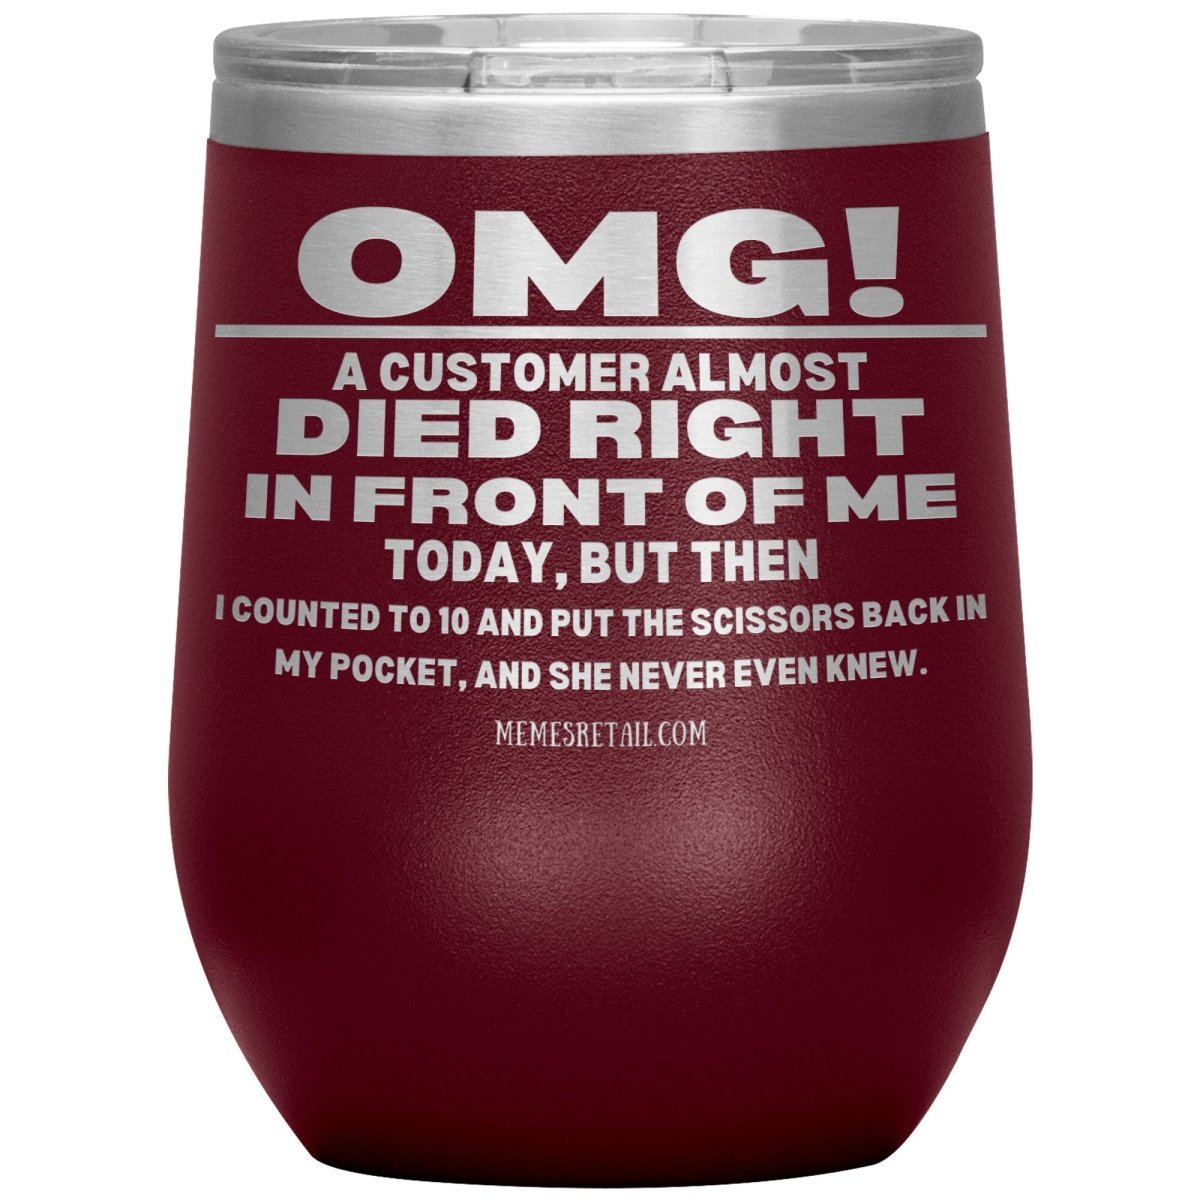 OMG! A Customer Almost Died Right In Front Of Me Tumbler, 12oz Wine Insulated Tumbler / Maroon - MemesRetail.com